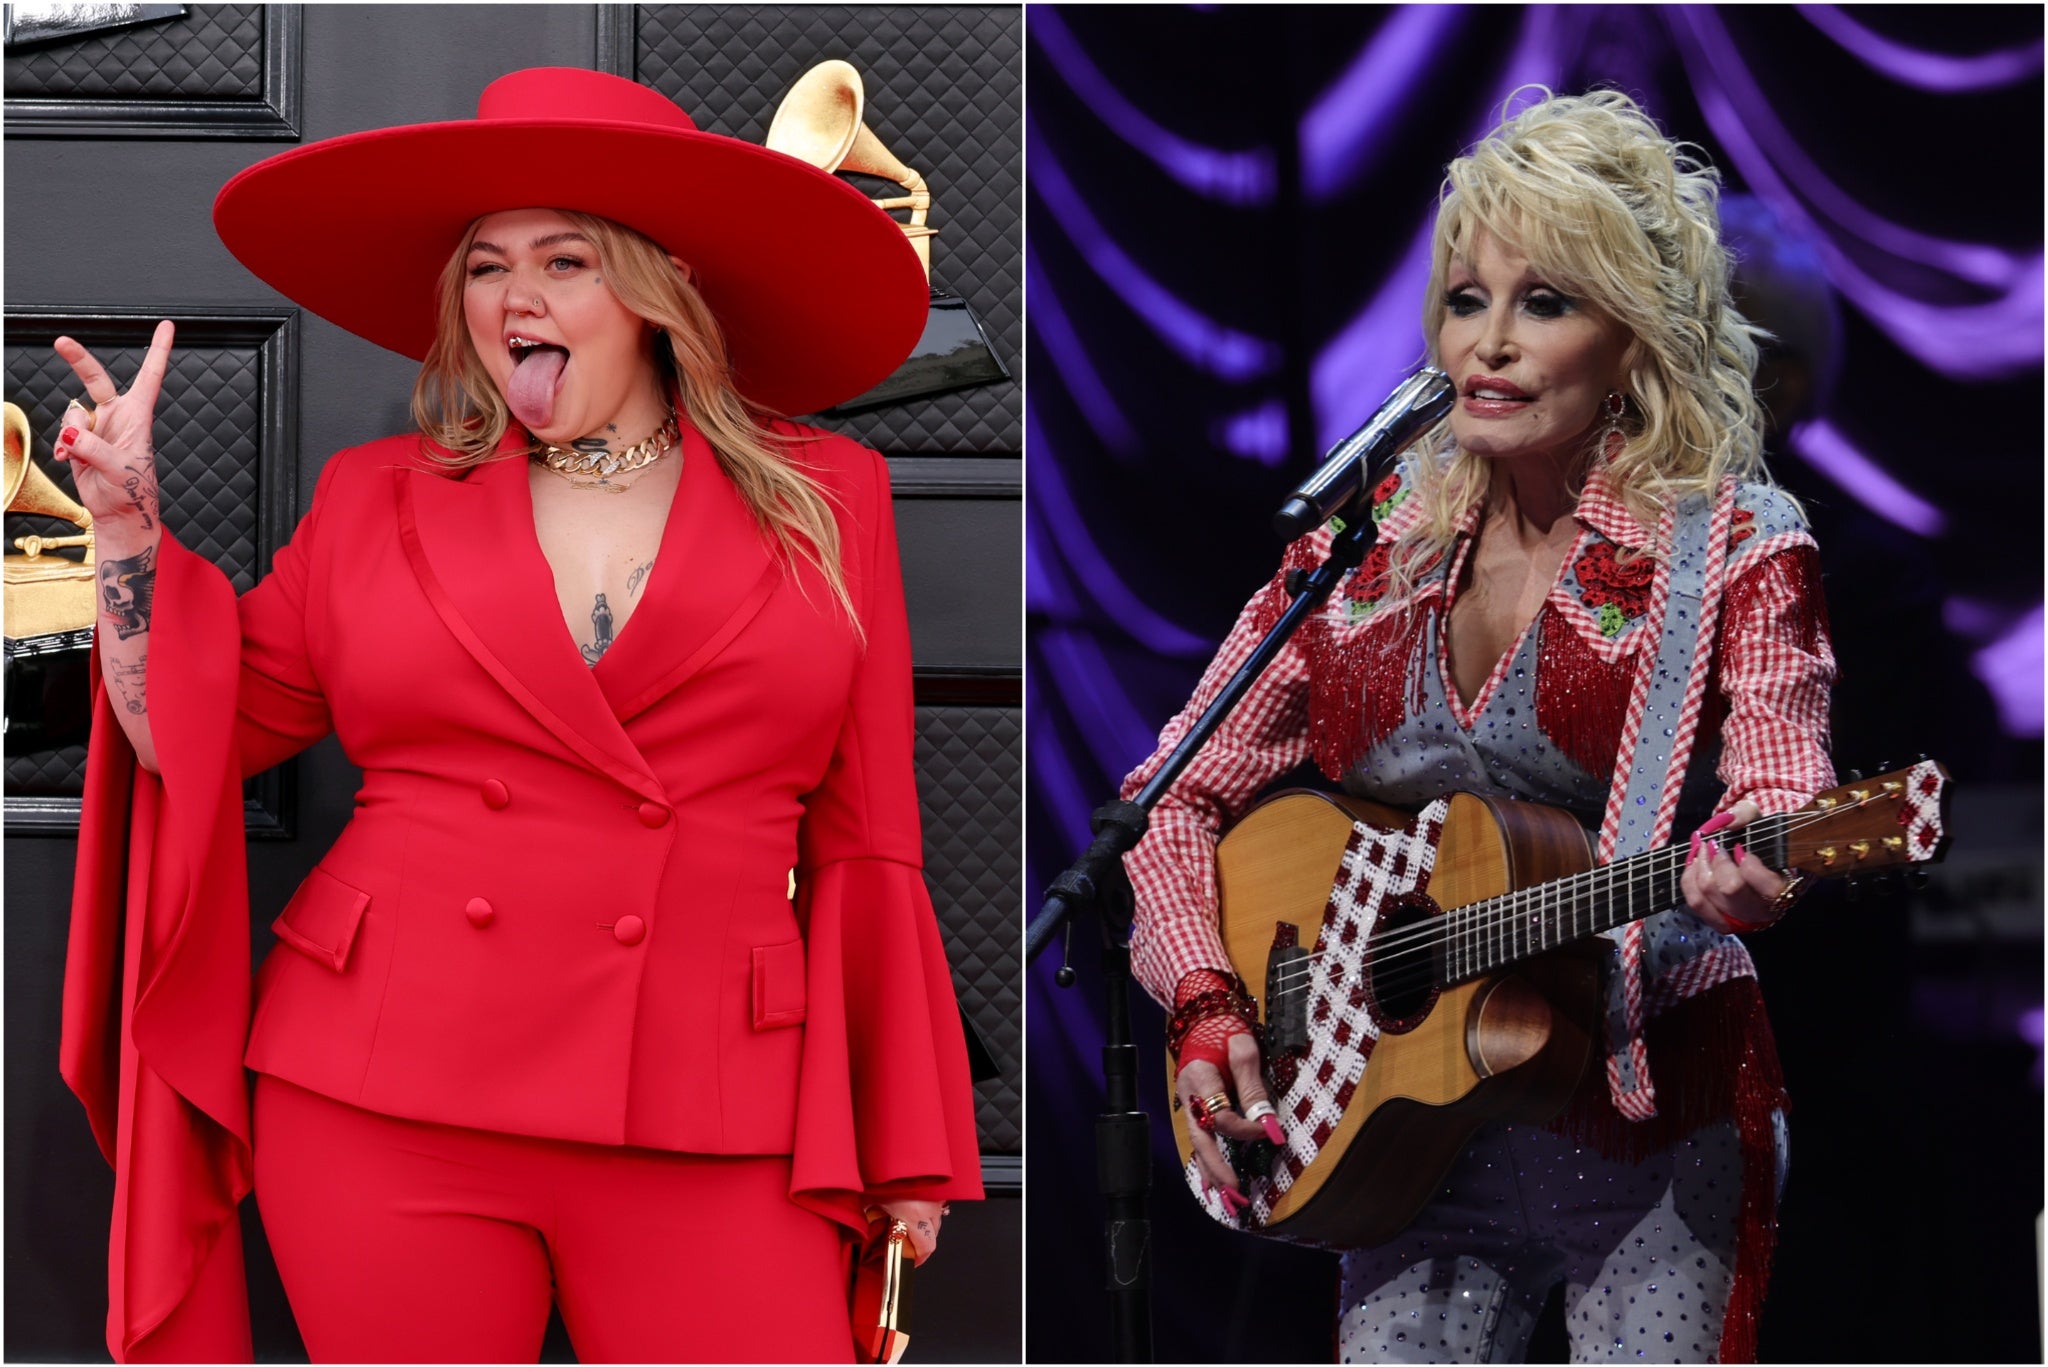 Elle King was criticised for her Dolly Parton tribute performance